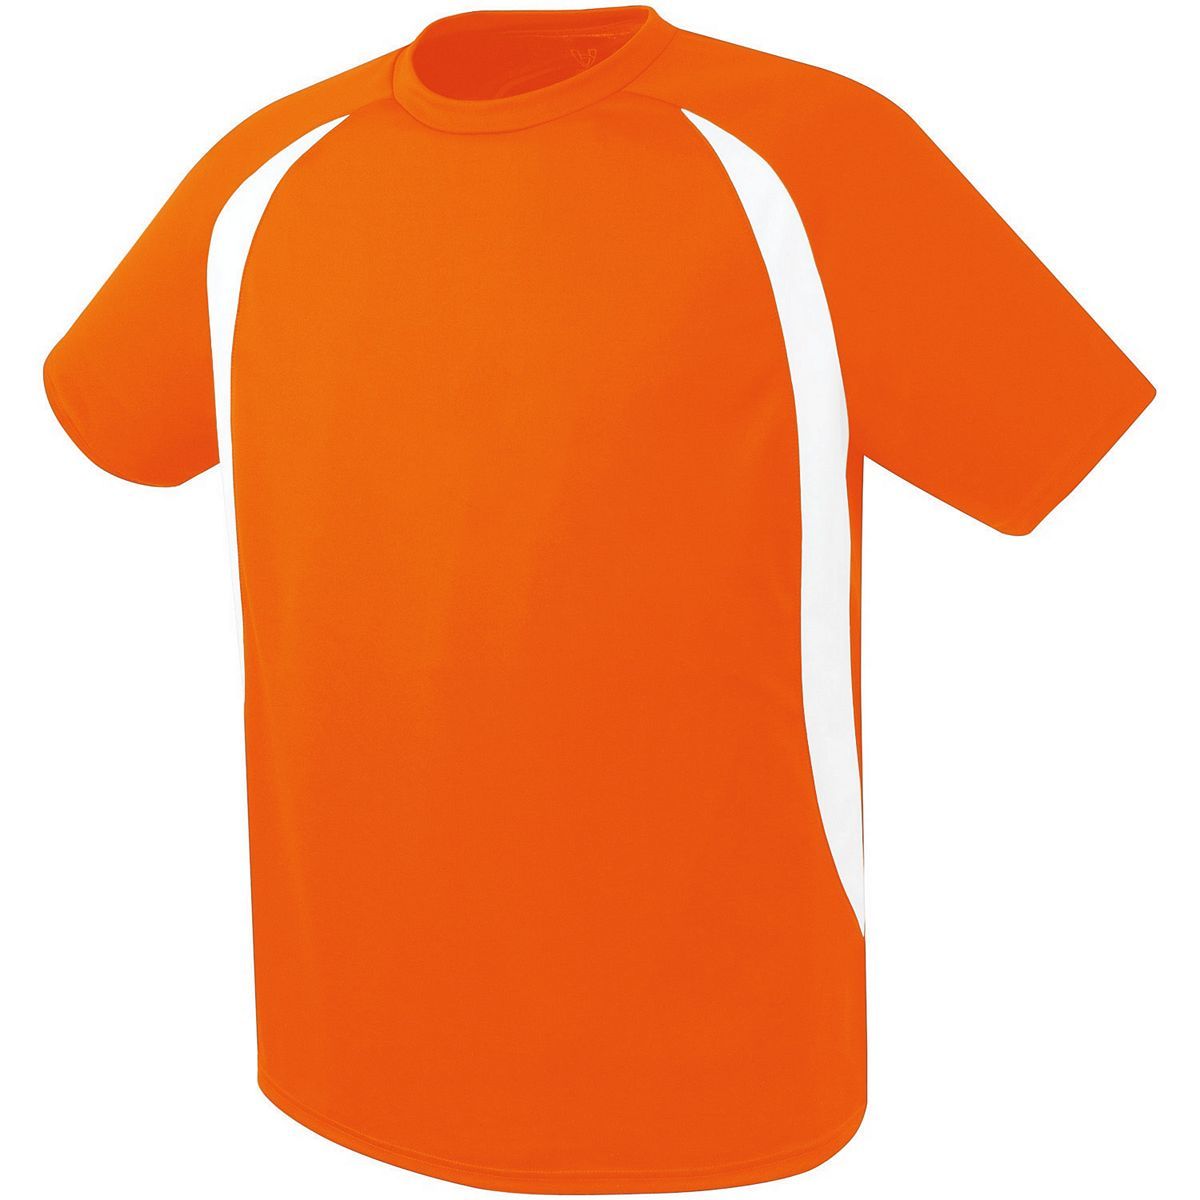 High 5 Youth Liberty Soccer Jersey in Orange/White  -Part of the Youth, Youth-Jersey, High5-Products, Soccer, Shirts, All-Sports-1 product lines at KanaleyCreations.com